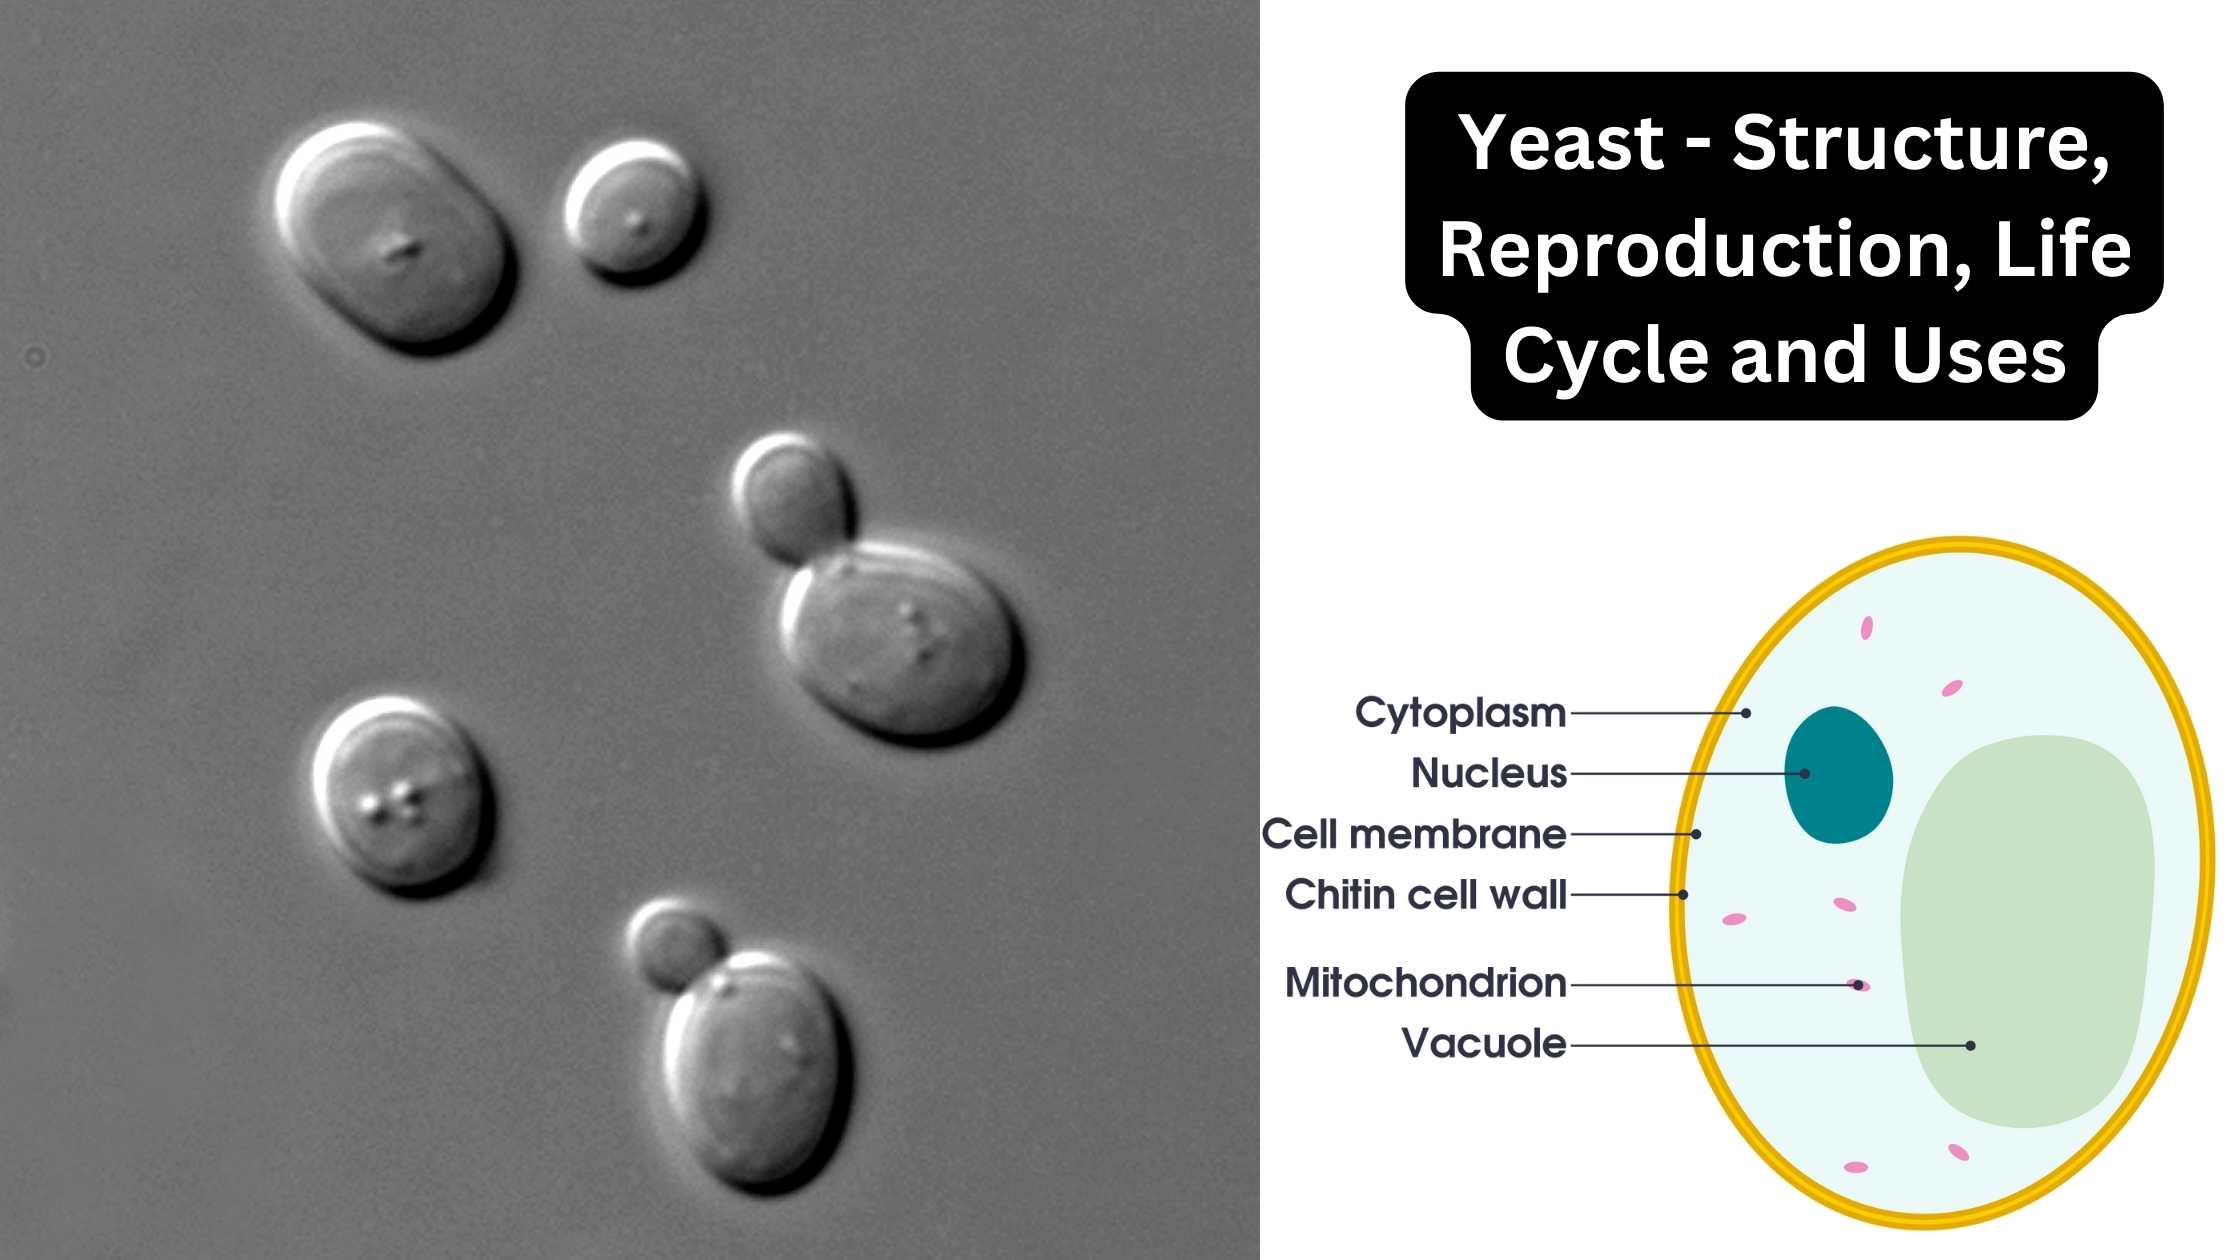 Yeast - Structure, Reproduction, Life Cycle and Uses